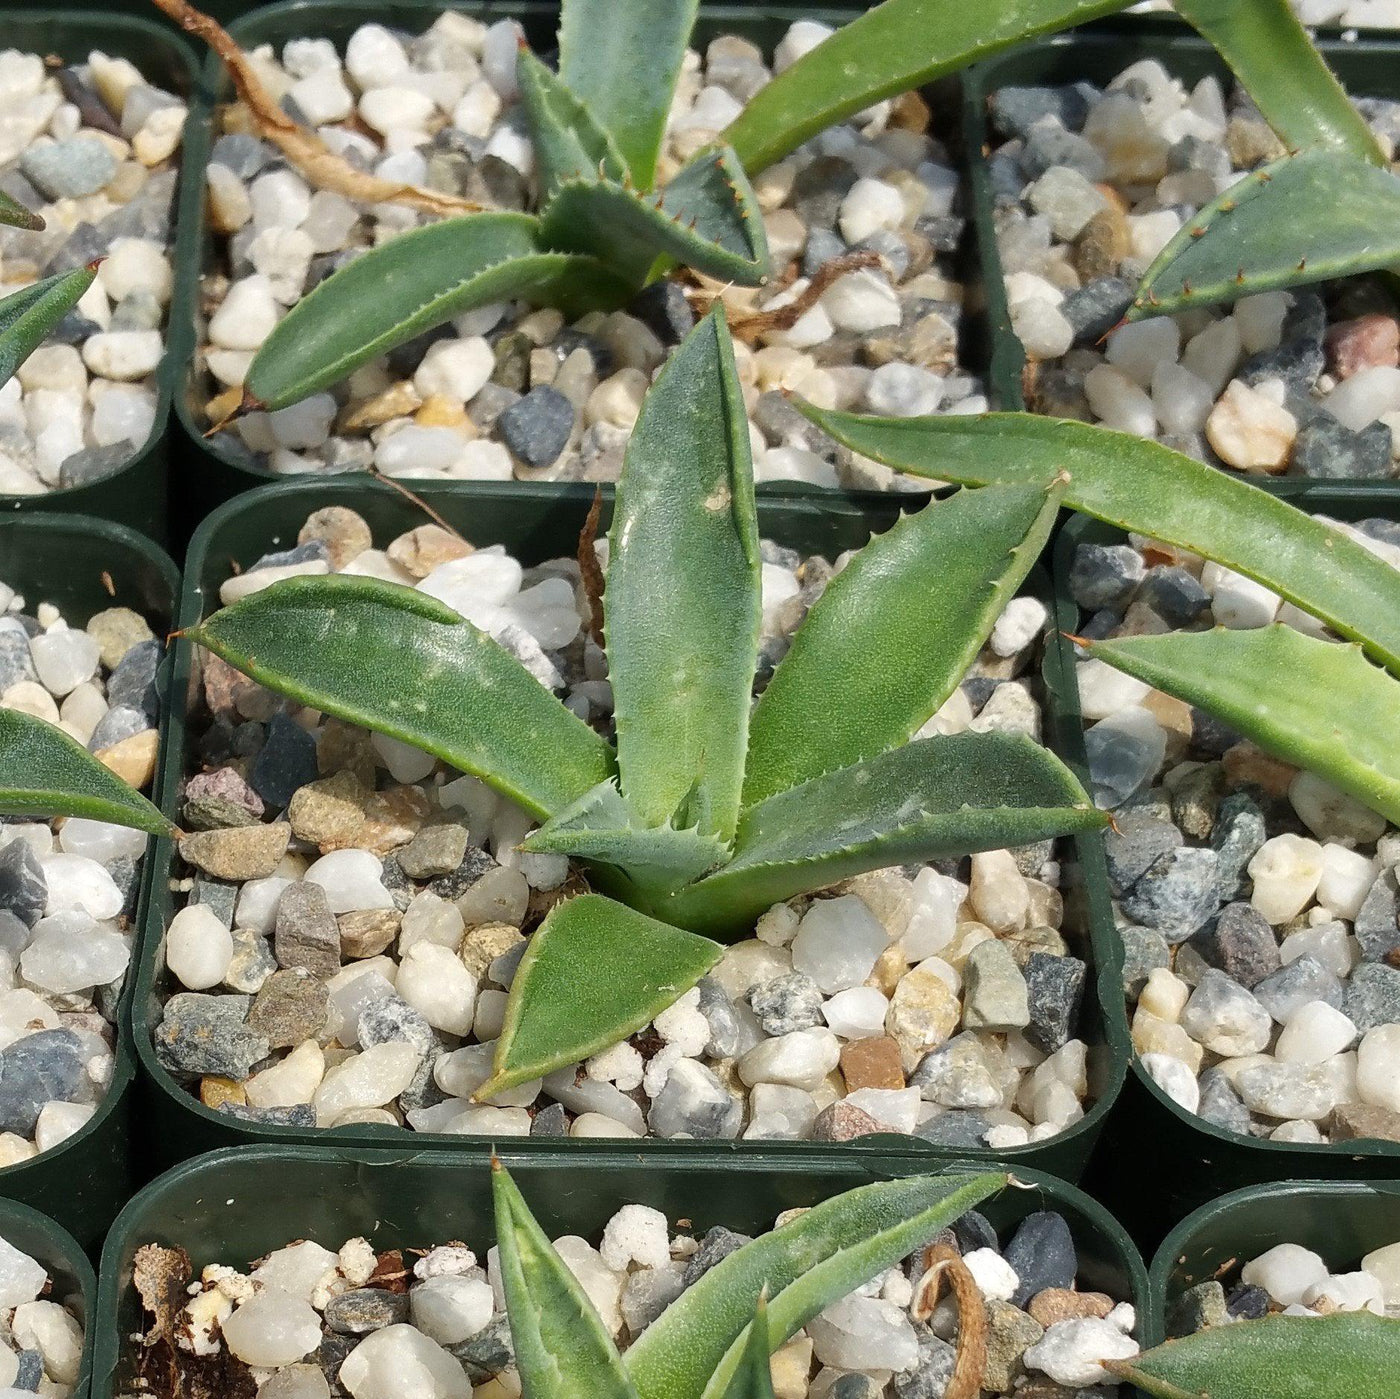 Parry’s Agave – Agave parryi